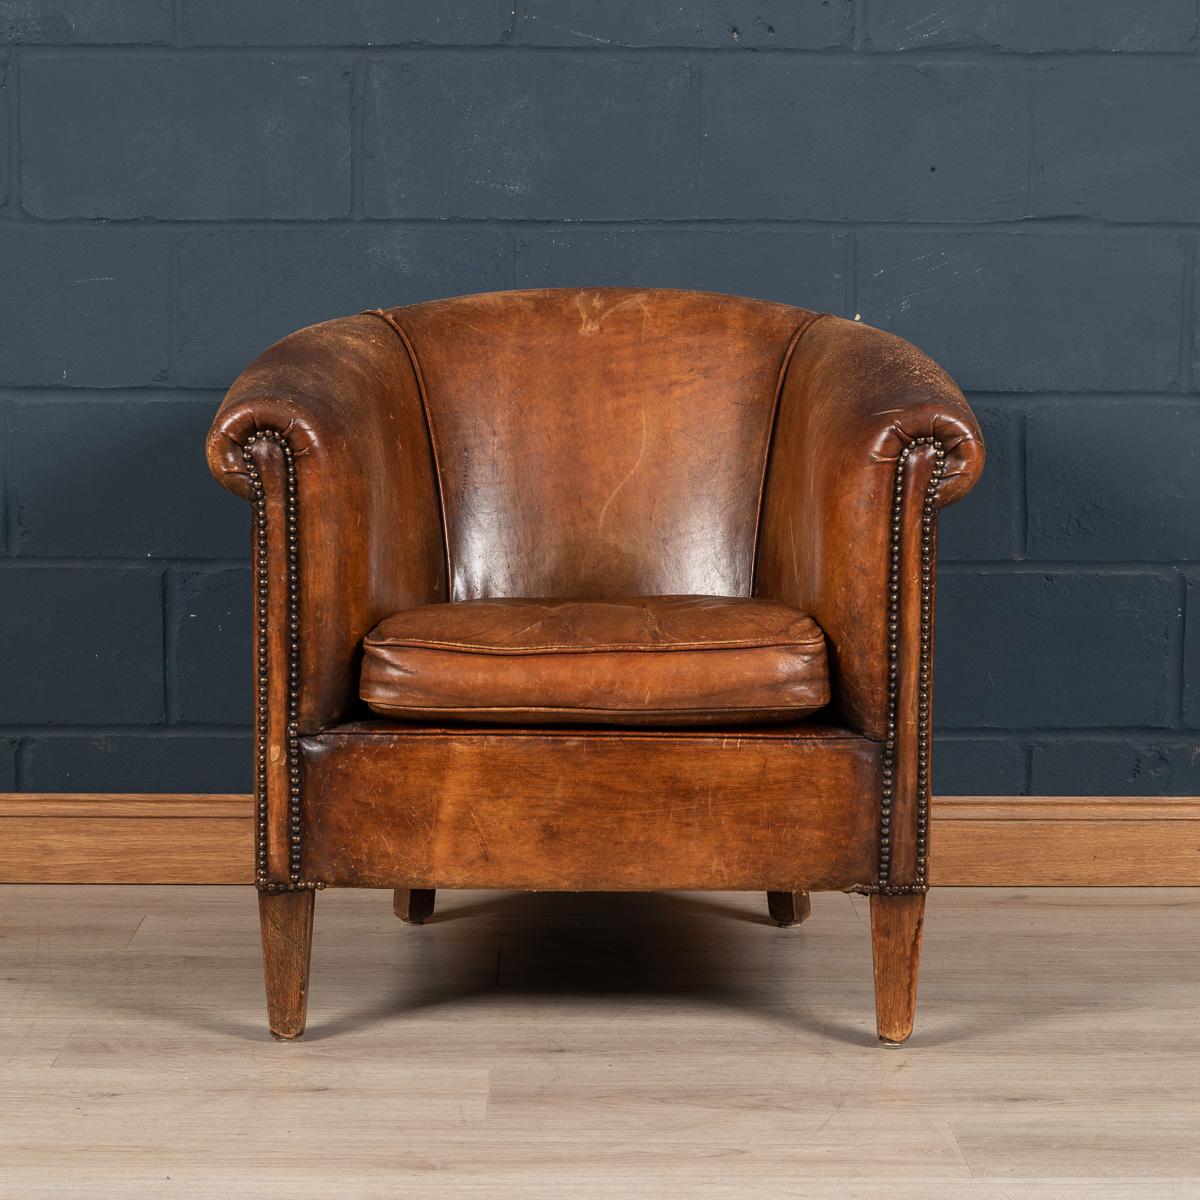 Showing superb patina and colour, this wonderful tub chair was hand upholstered sheepskin leather by Nico Van Oorschot, one of the finest craftsmen of sheepskin leather in Holland. Fantastic look for any interior, both modern and traditional.

 